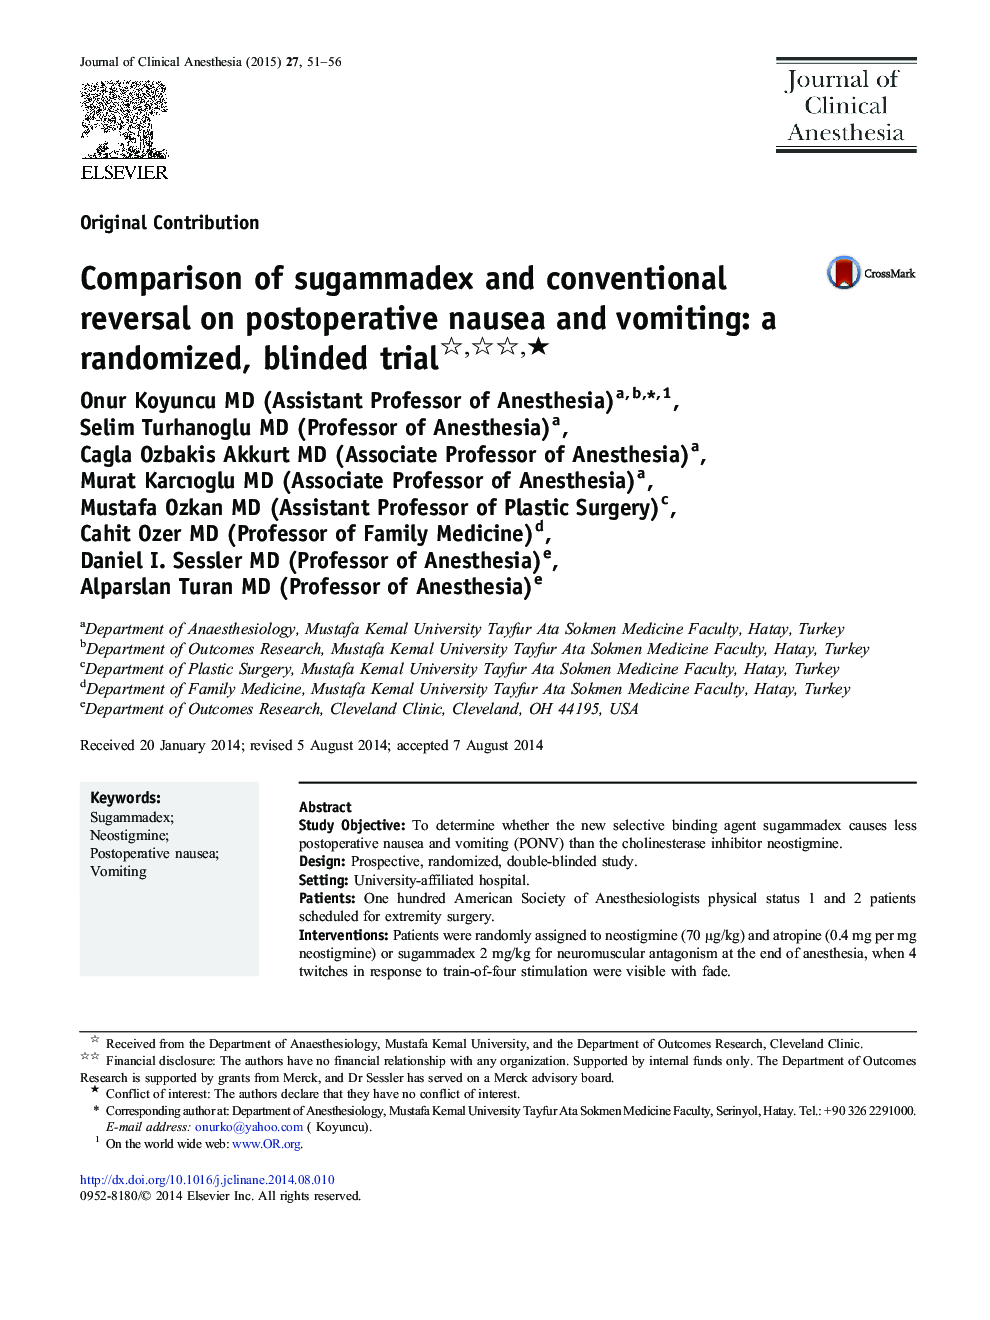 Comparison of sugammadex and conventional reversal on postoperative nausea and vomiting: a randomized, blinded trial ★